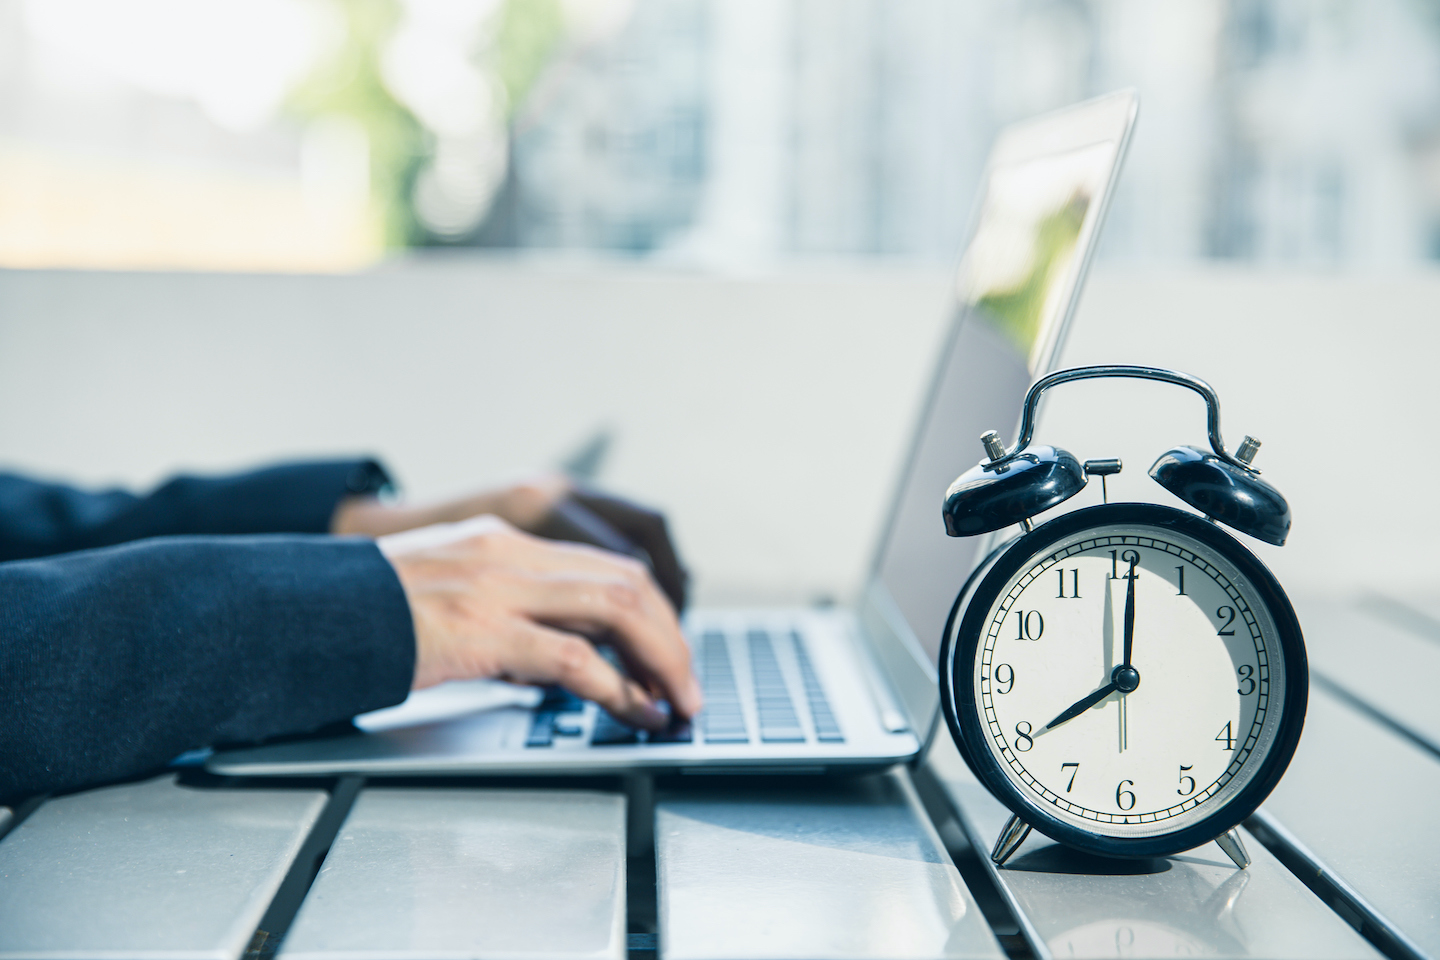 Lawyers, Avoid These 4 Time-Wasters in Your Practice